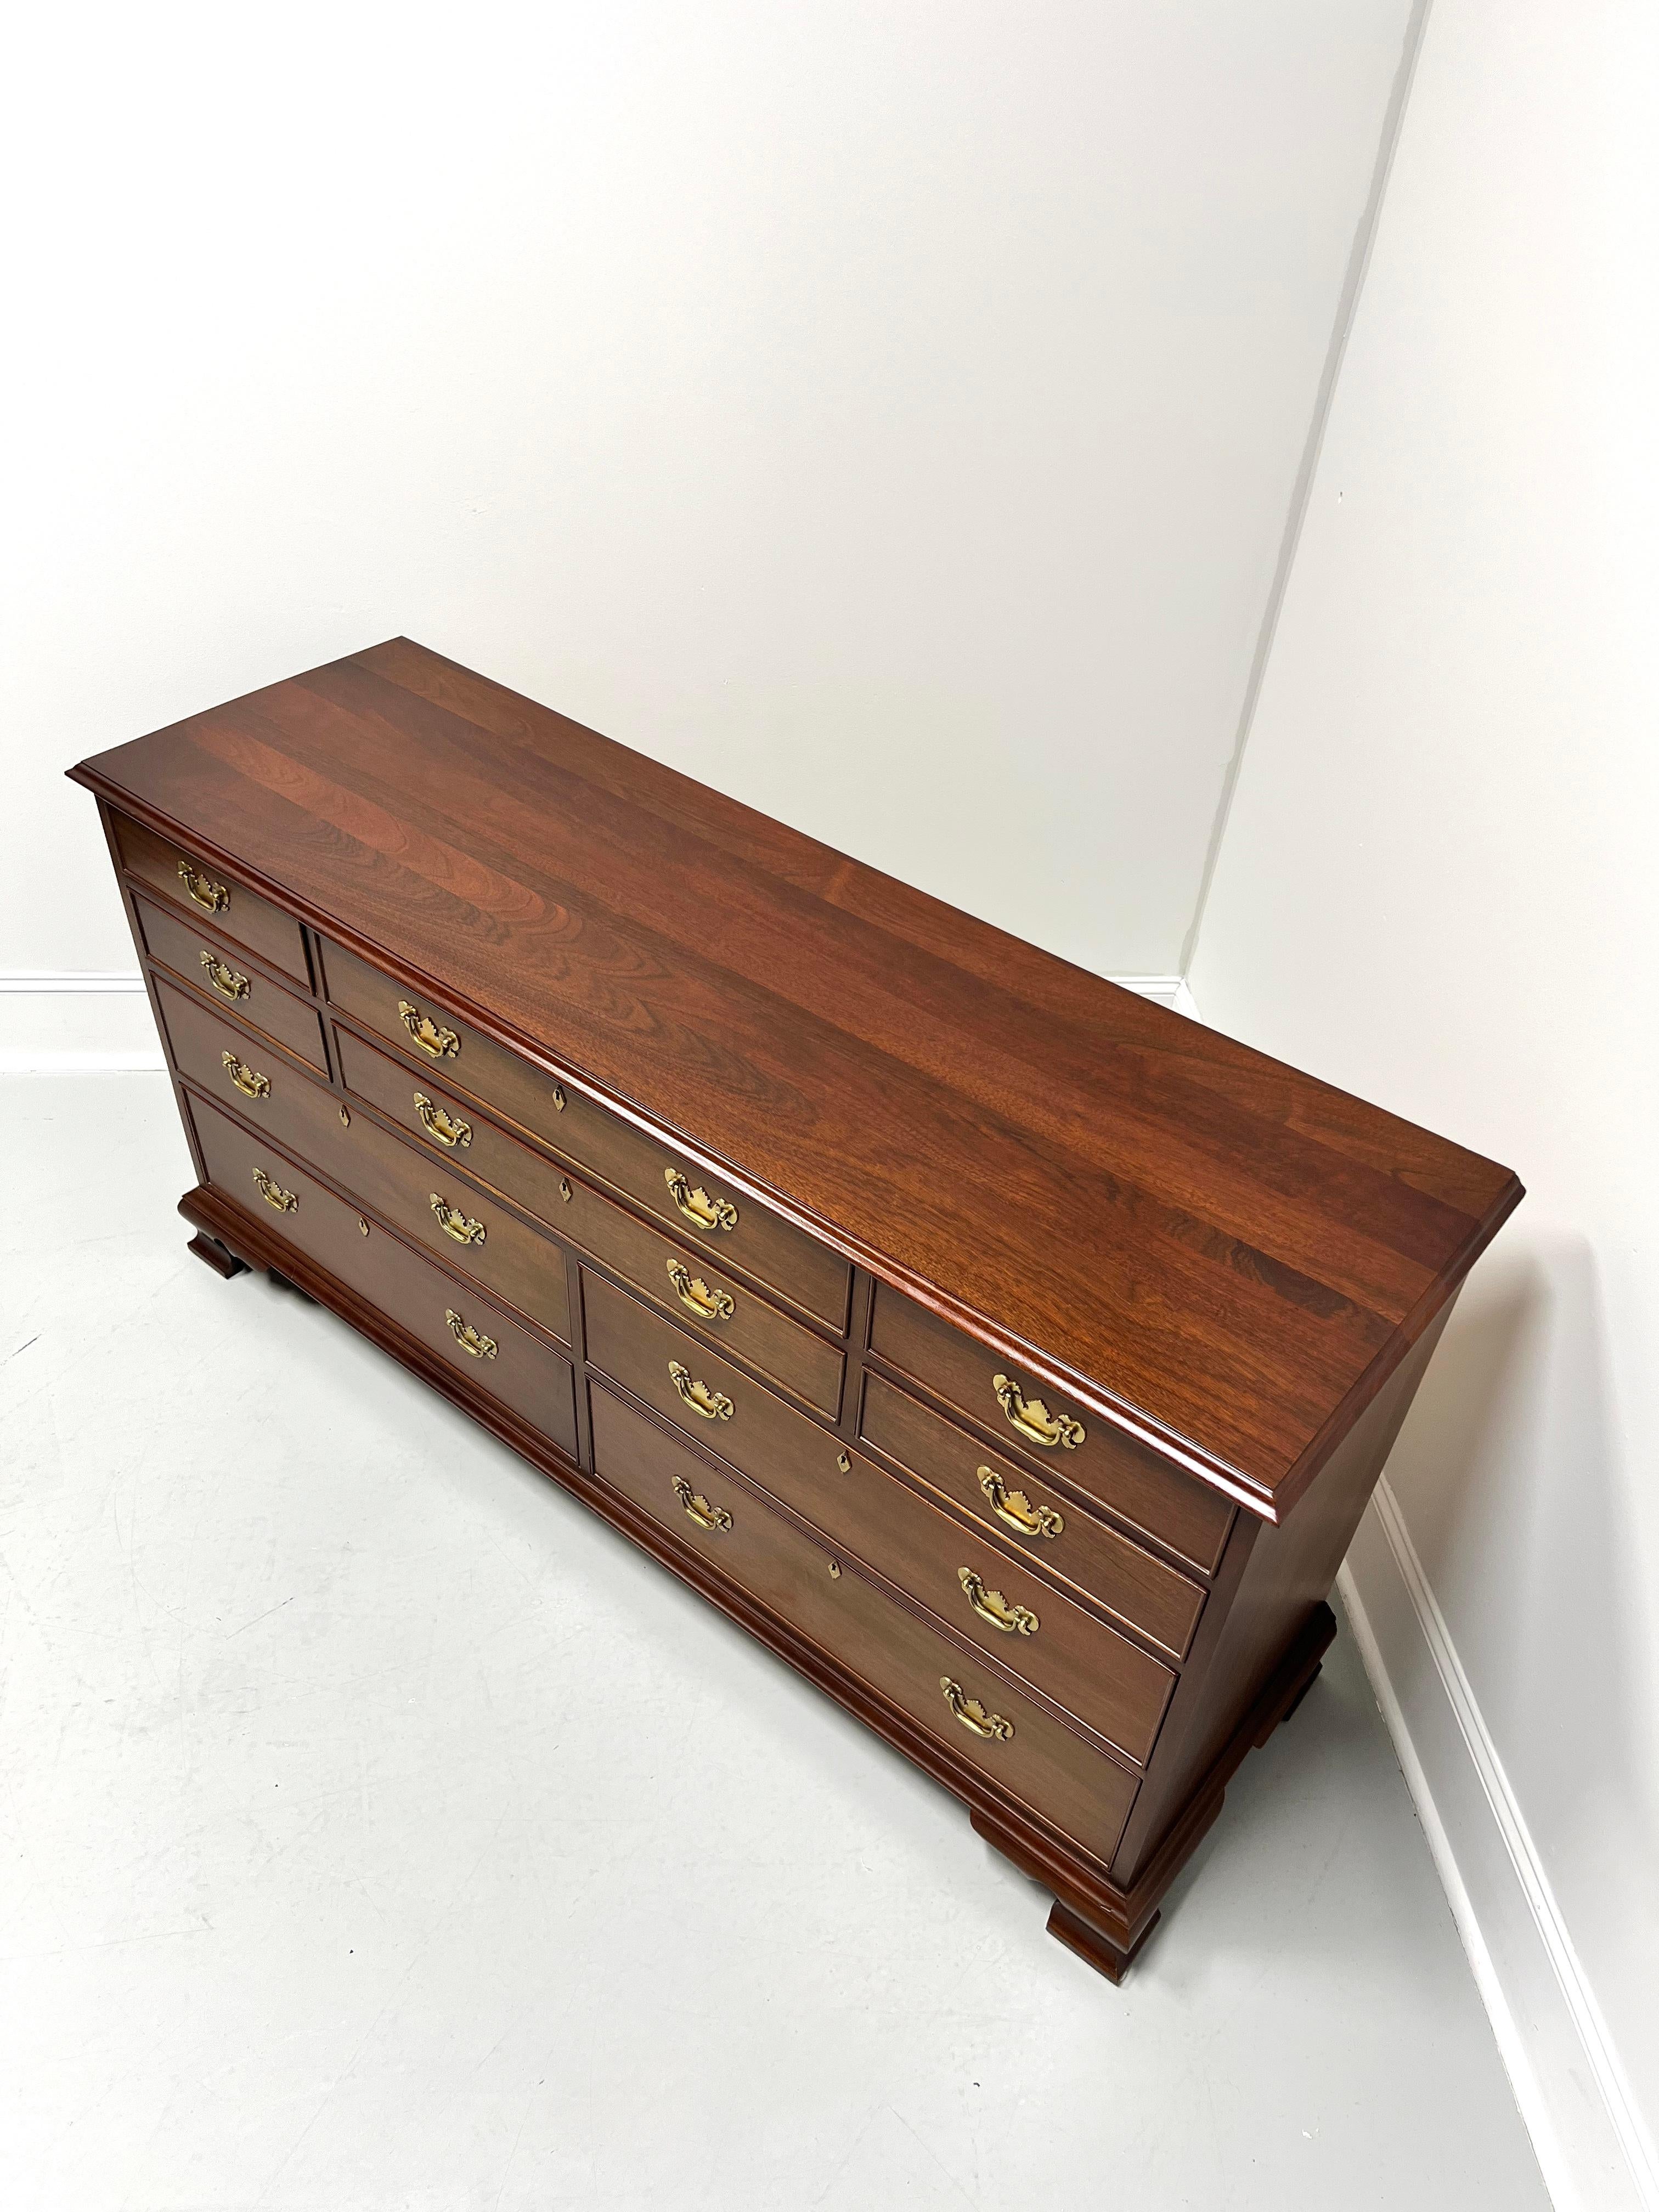 American CRAFTIQUE Solid Mahogany Chippendale Ten-Drawer Triple Dresser w/ Ogee Feet